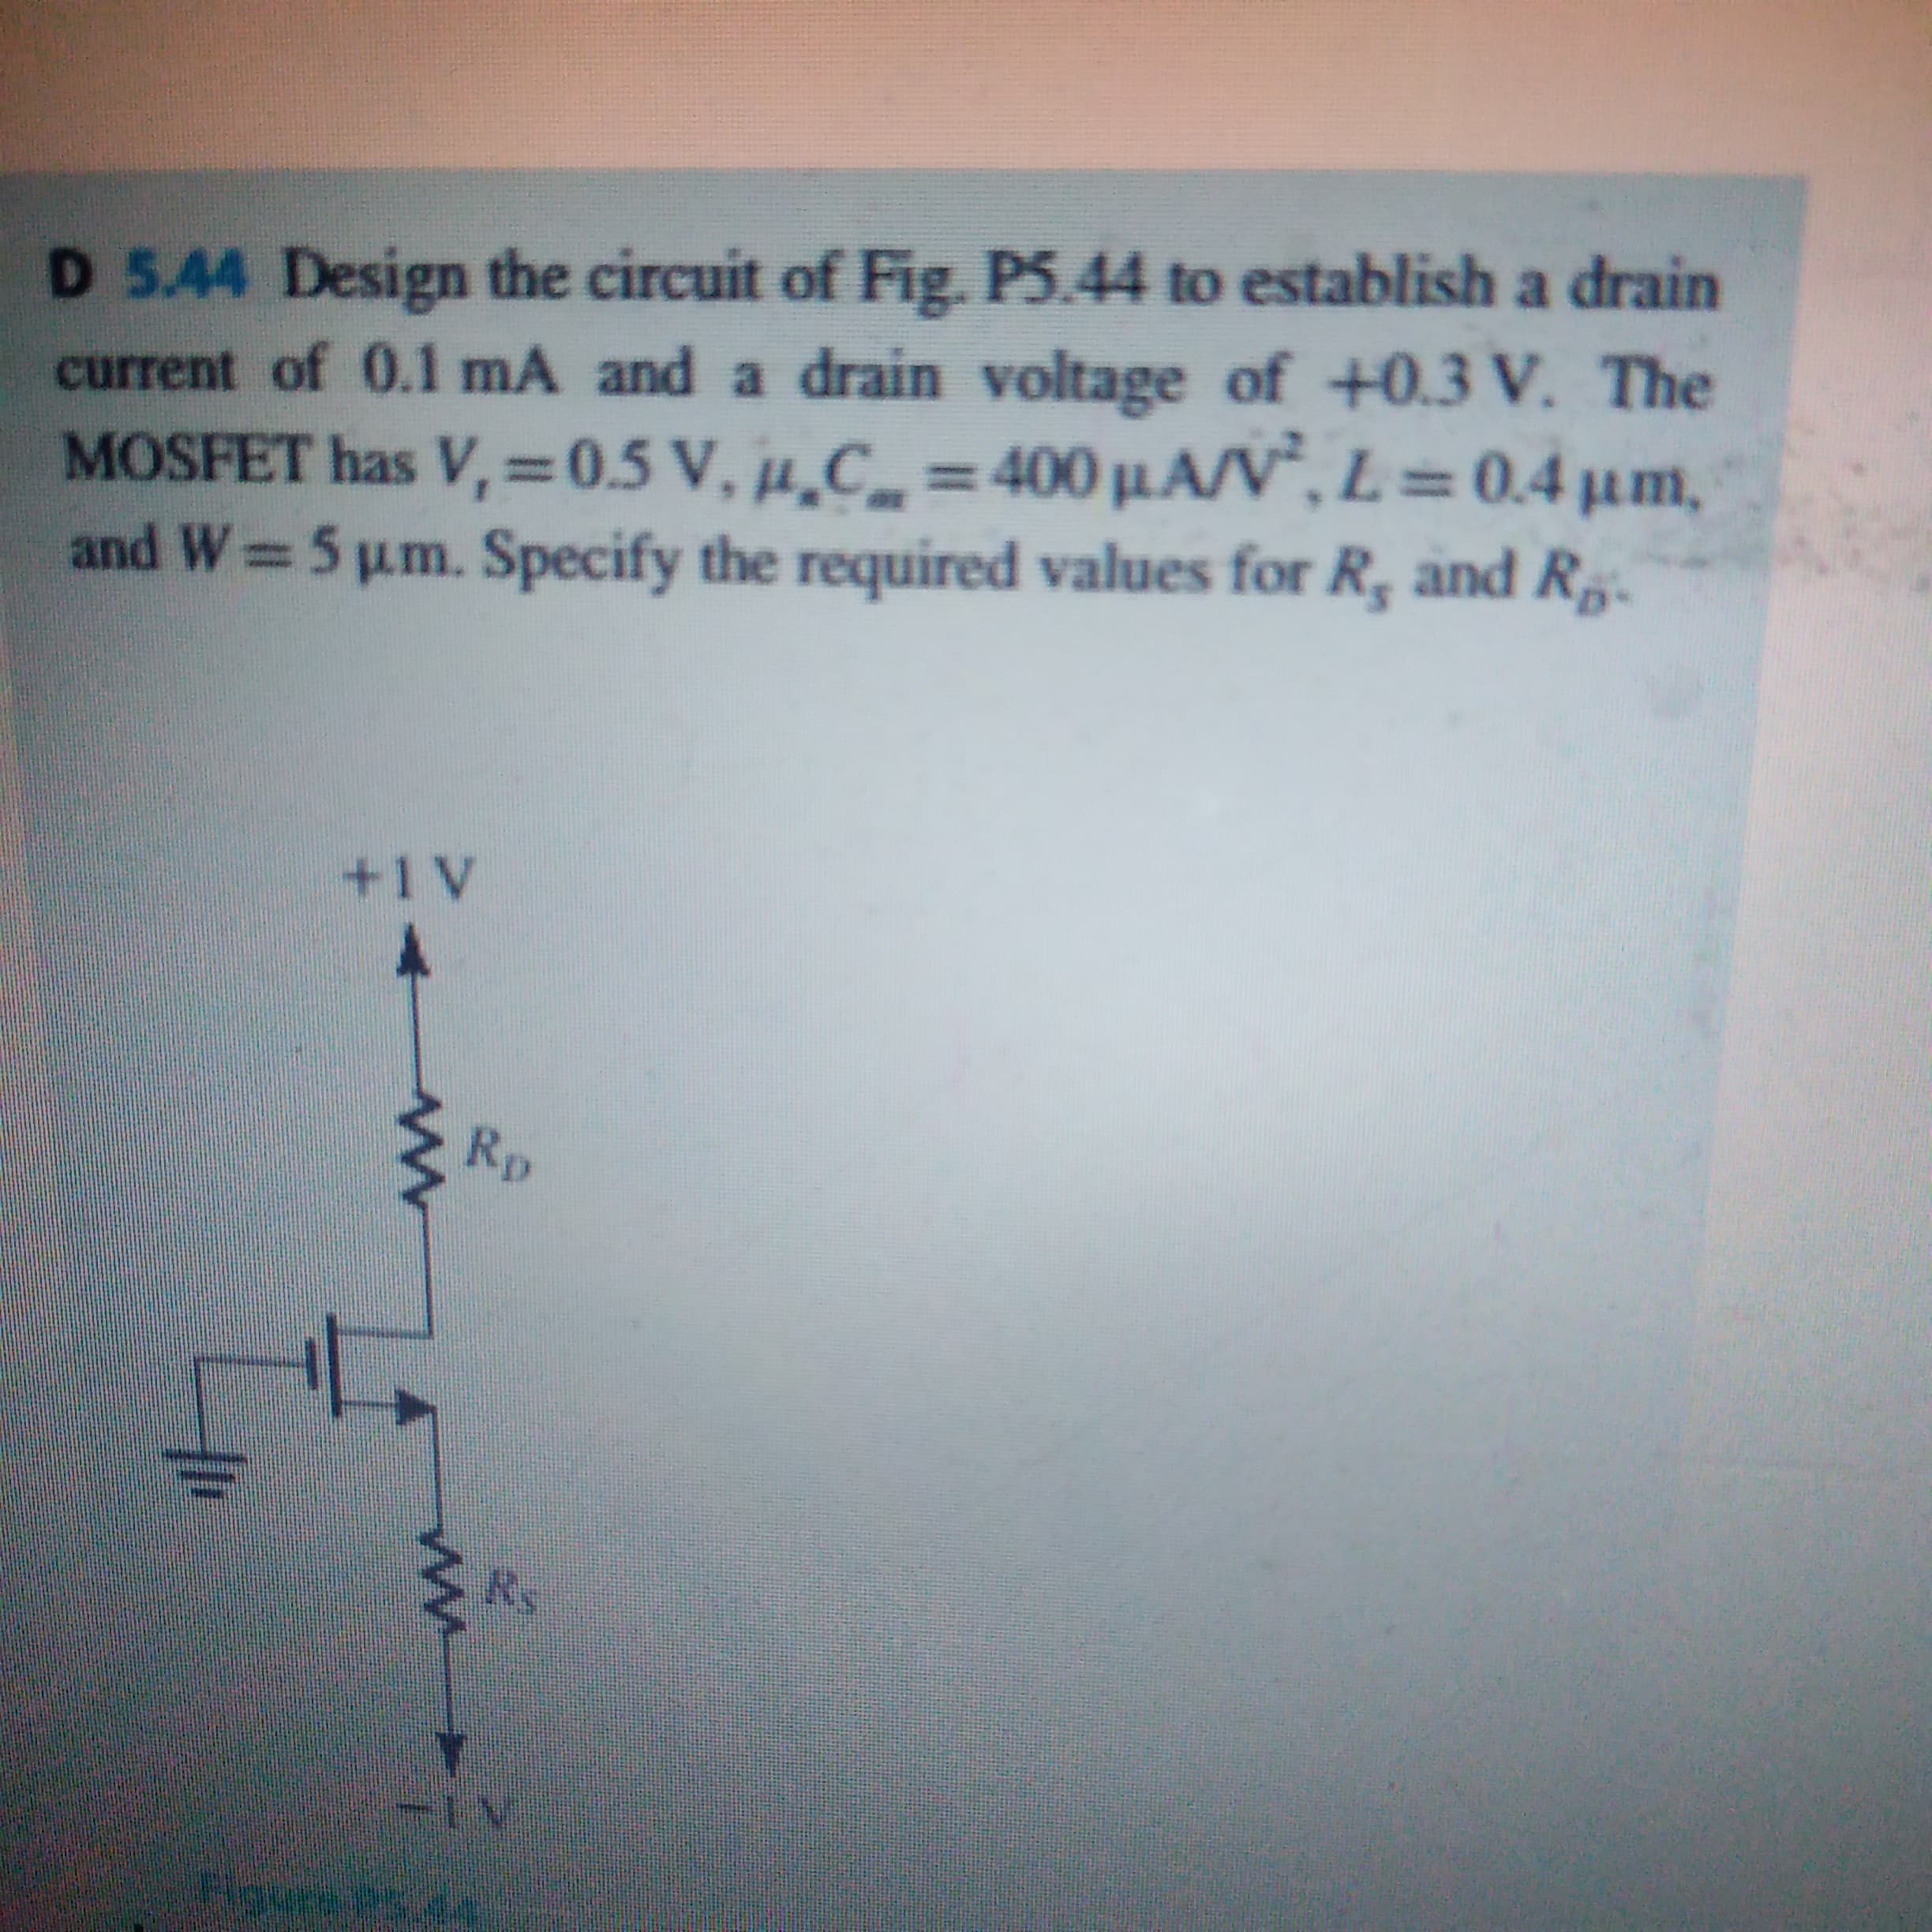 D 5.44 Design the circuit of Fig. P5.44 to establish a drain
current of 0.1 mA and a drain voltage of +0.3 V. The
MOSFET has V,=0.5 V, µ̟C_ = 400 µ.A/V“, L= 0.4 µm,
and W 5 um. Specify the required values for R, and R,.
%3D
%3D
%3D
+1V
Rp
Bovrees.dn
